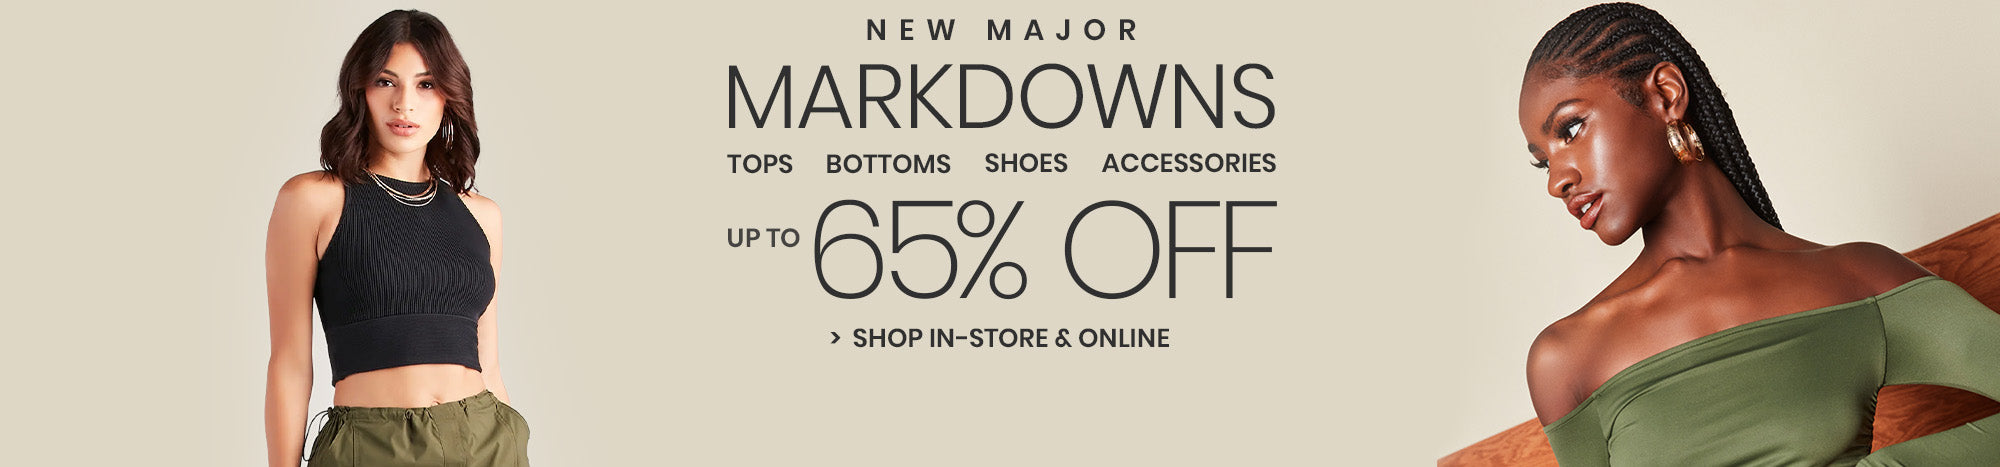 Shop new markdowns and get up to 65% off on women's clothing and Windsor fashions online or in-store including jeans, trendy tops, cargos, skirts, shorts, jewelry, & everything you need to create new looks affordably!